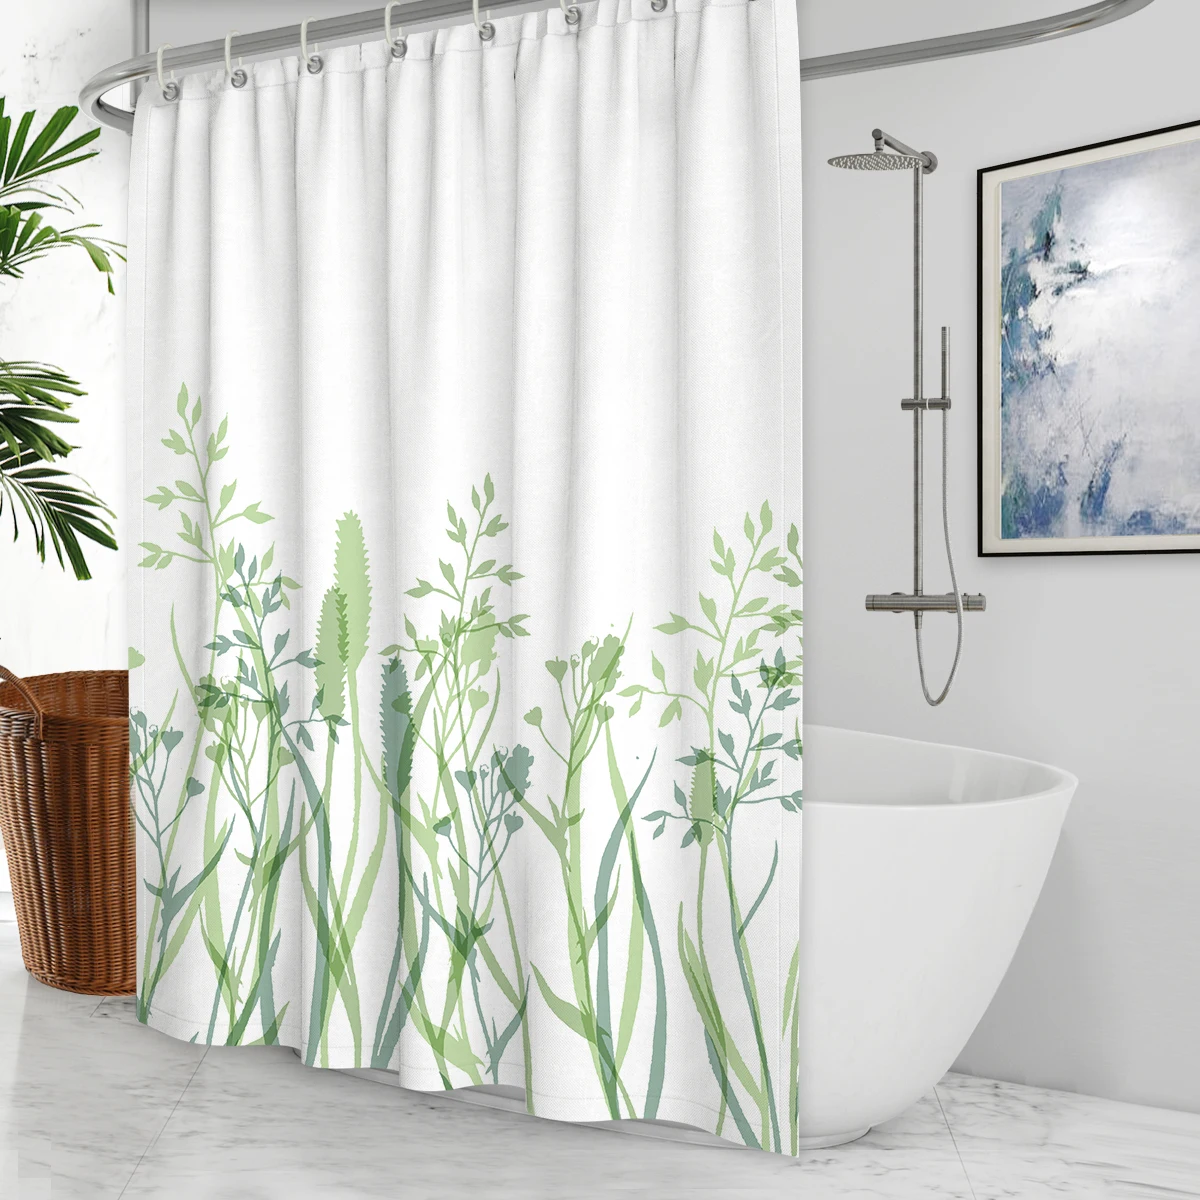 

Plant Shower Curtain Home Tropical Green Leaves Decor Bathroom Waterproof Curtain Modern Simple with Hooks Partition Banheiro